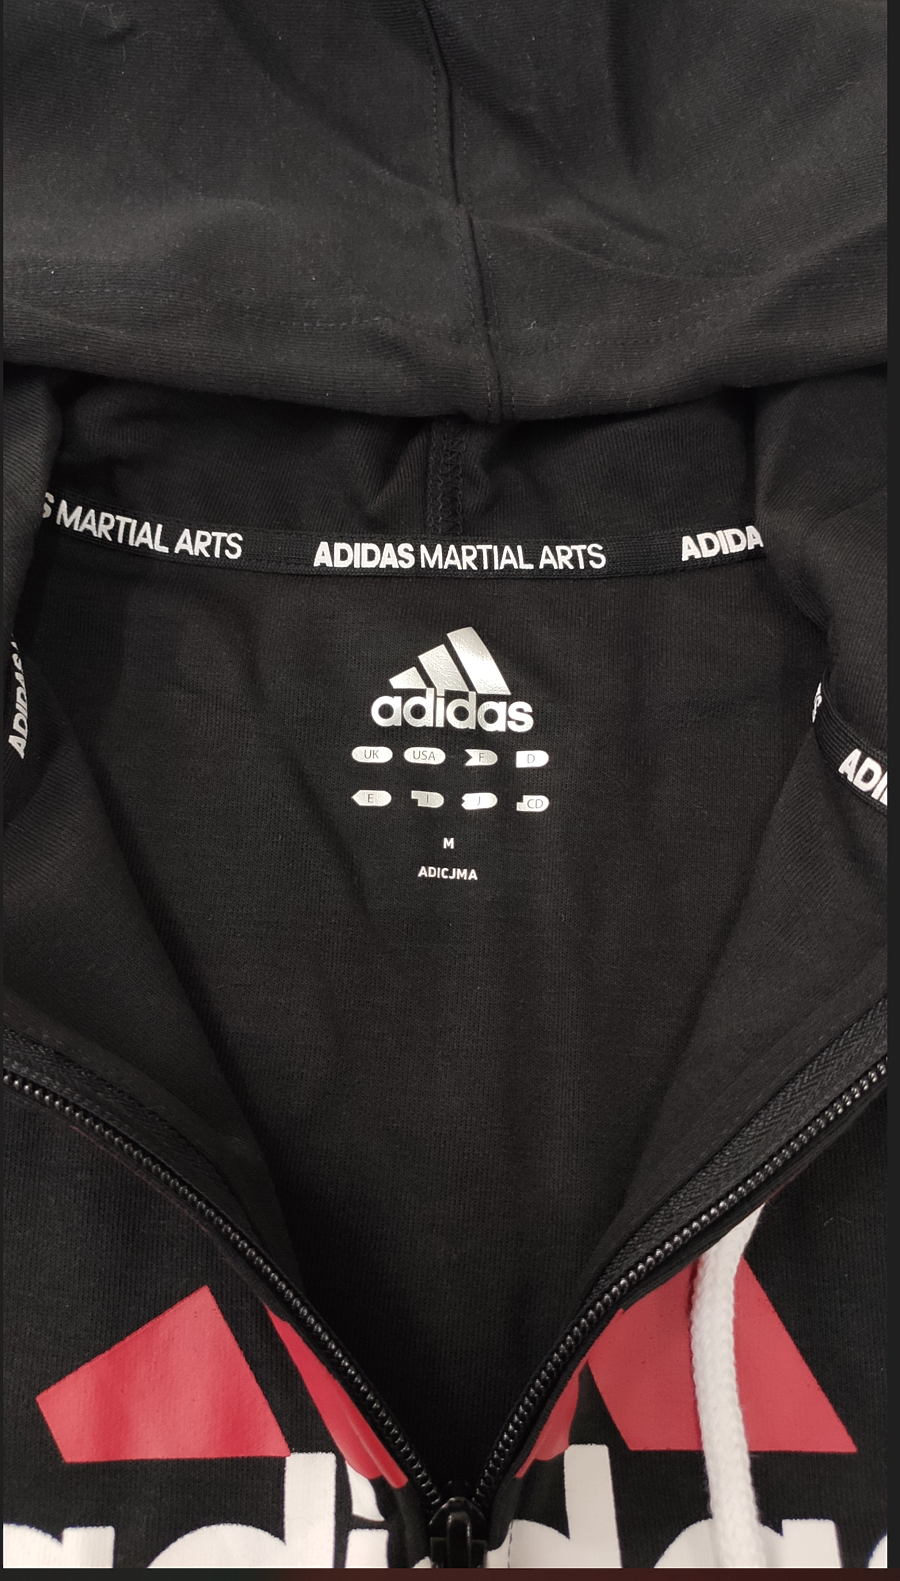 SPECIAL OFFER Adidas hoodie for couple models Size：M #530897 replica